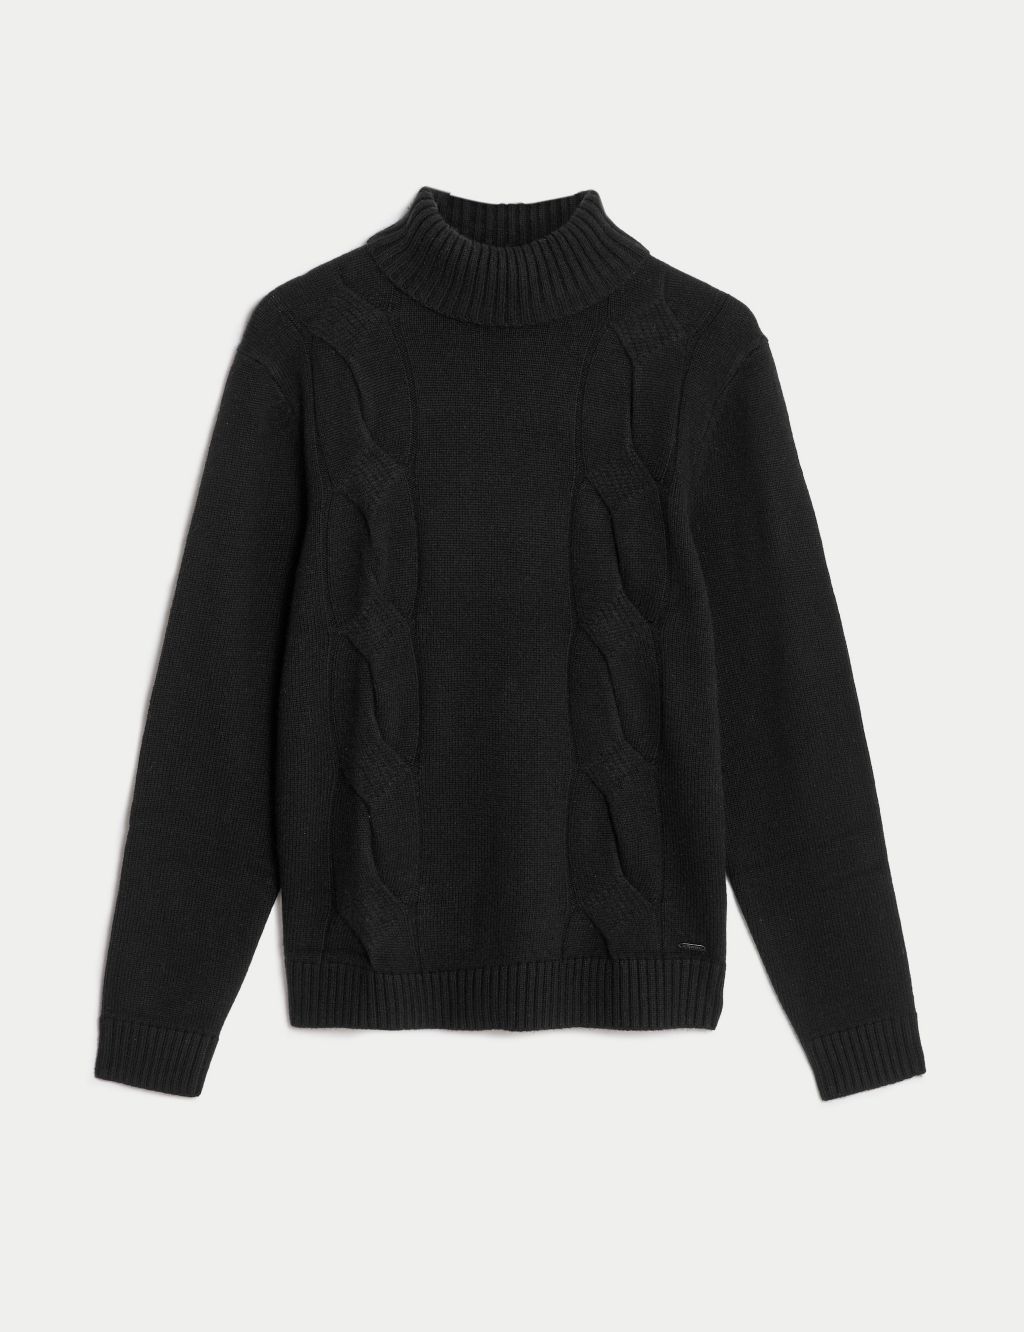 Extra Fine Merino Wool Jumper with Cashmere image 2